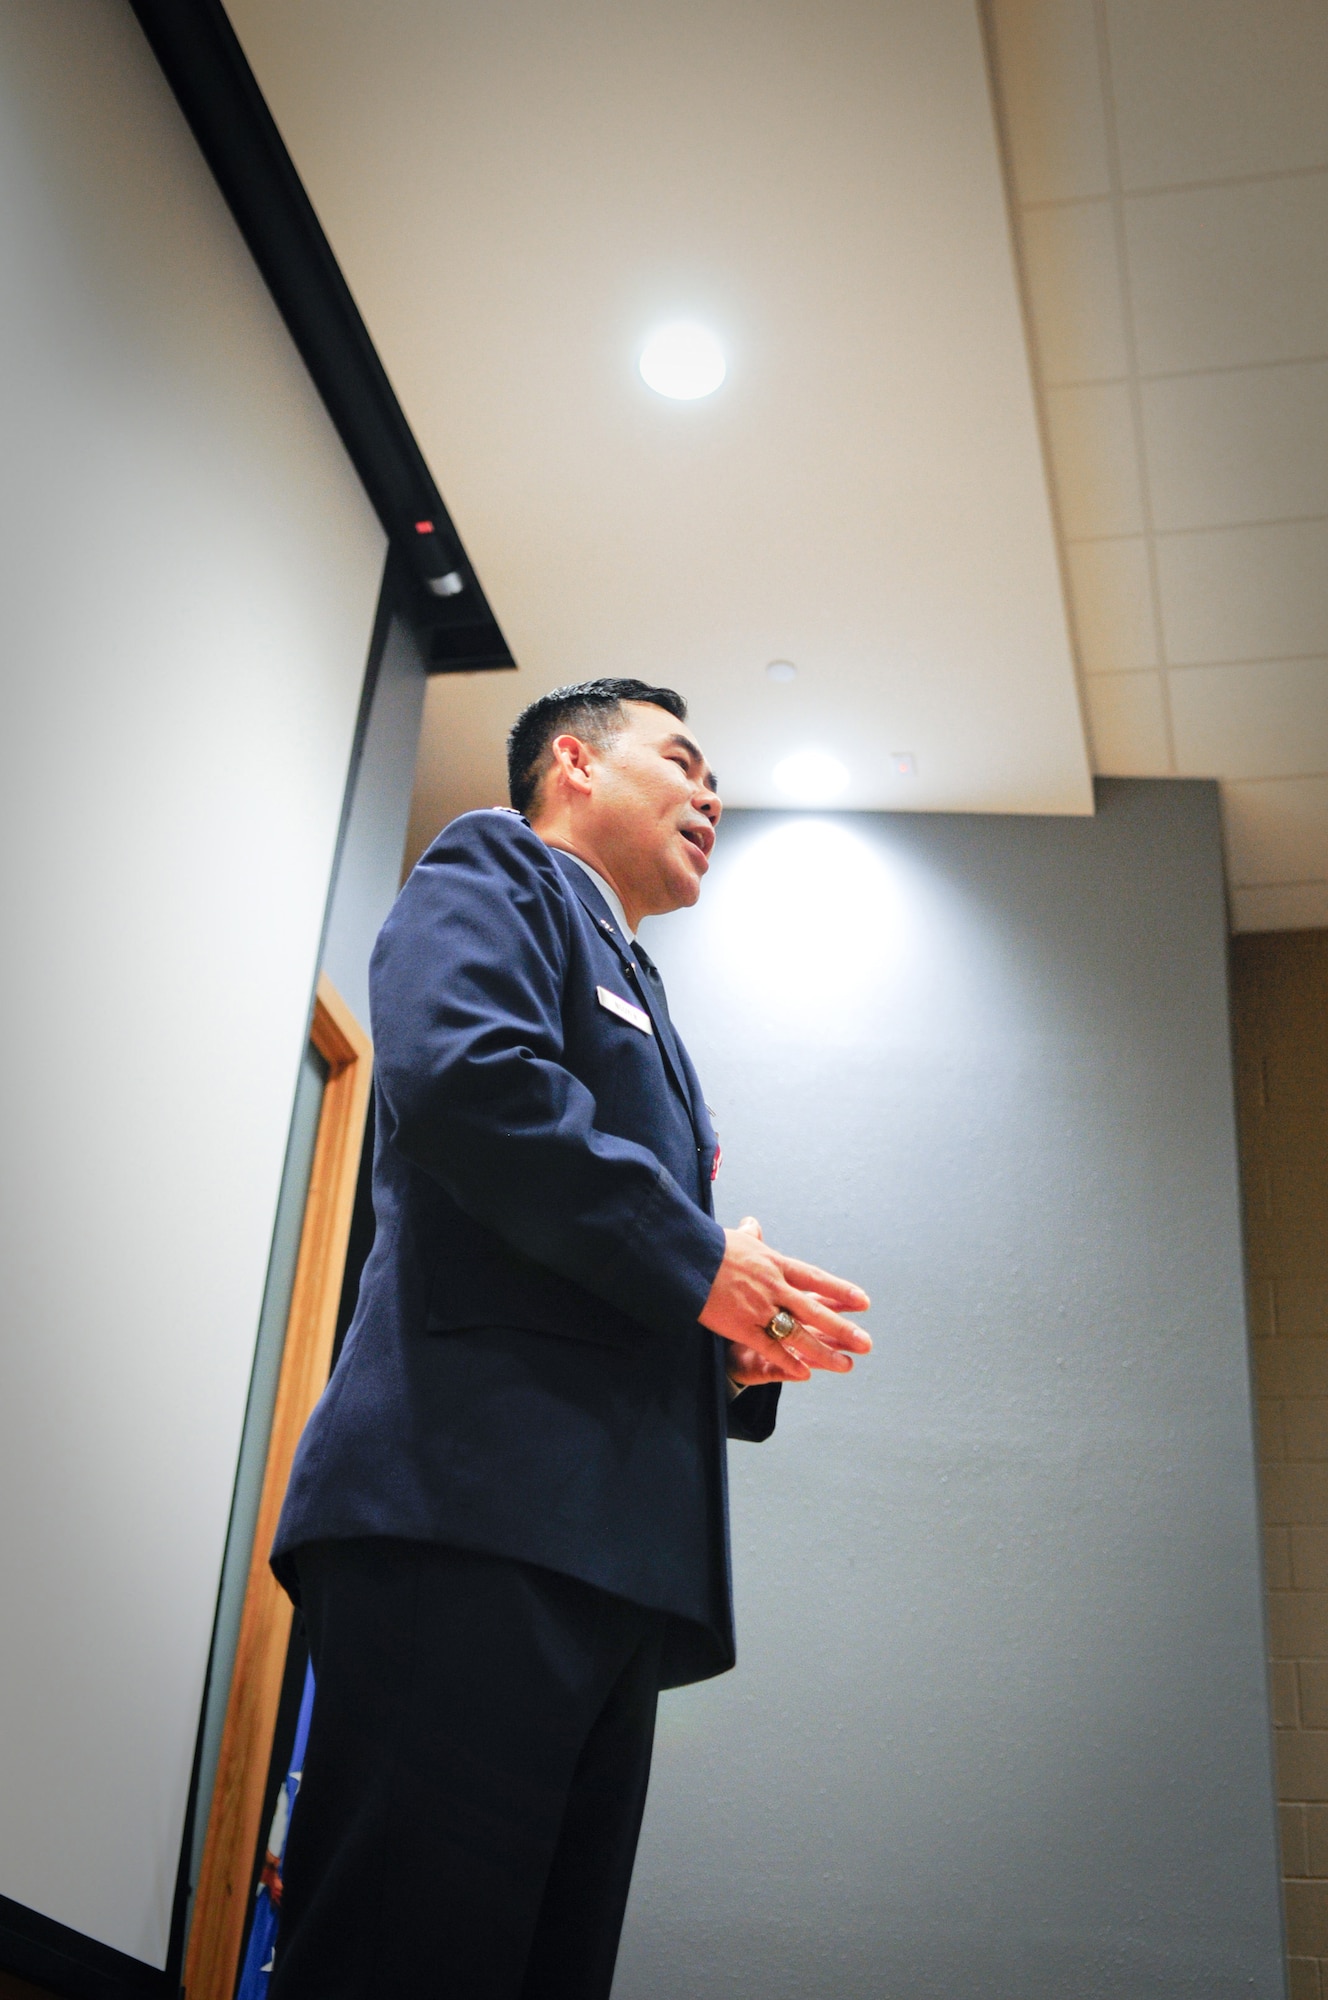 Air Force Lt. Col. Don Nguyen, assistant director of operations for the 273rd Information Operations Squadron (IOS), Texas Air National Guard, makes remarks during his retirement ceremony in San Antonio, Nov. 23, 2014. Nguyen retired after 27 years of military service, including time with the Texas Army and Air National Guards. (U.S. Air National Guard photo by Tech. Sgt. Eric L. Wilson / Released) 141123-Z-IT549-002